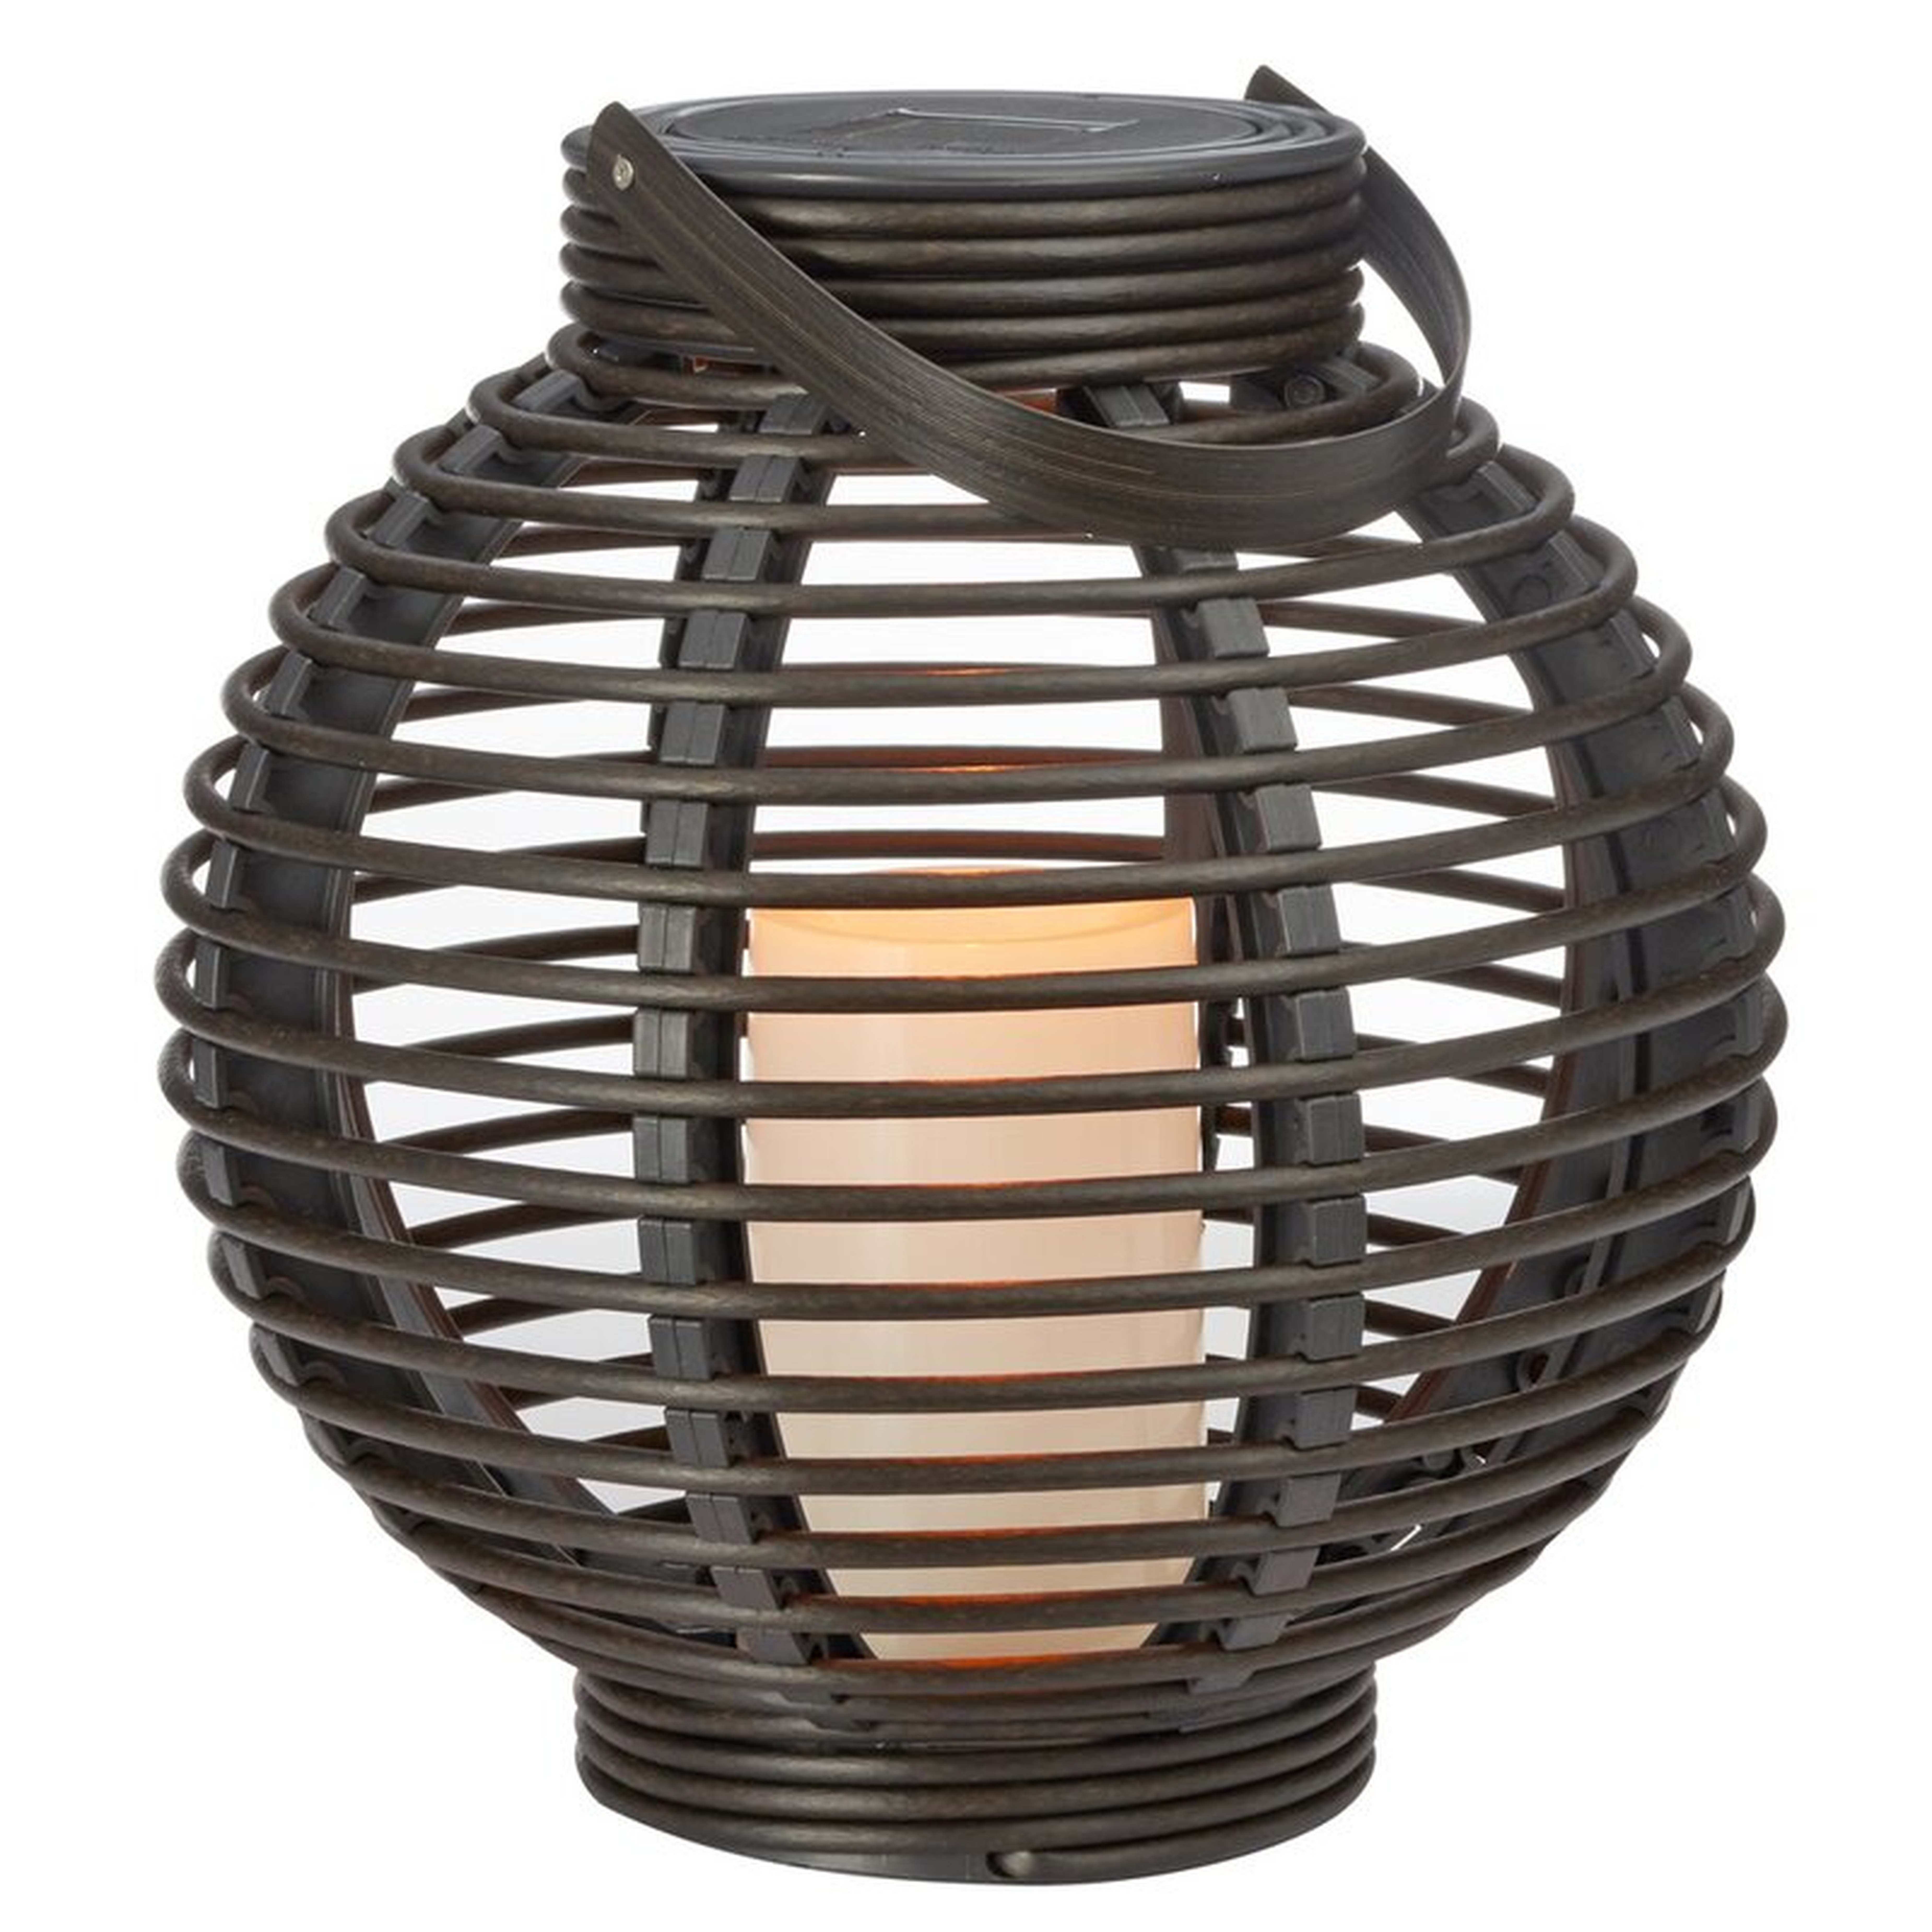 Basket Brown Solar Powered LED Outdoor Lantern with Electric Candle - Wayfair